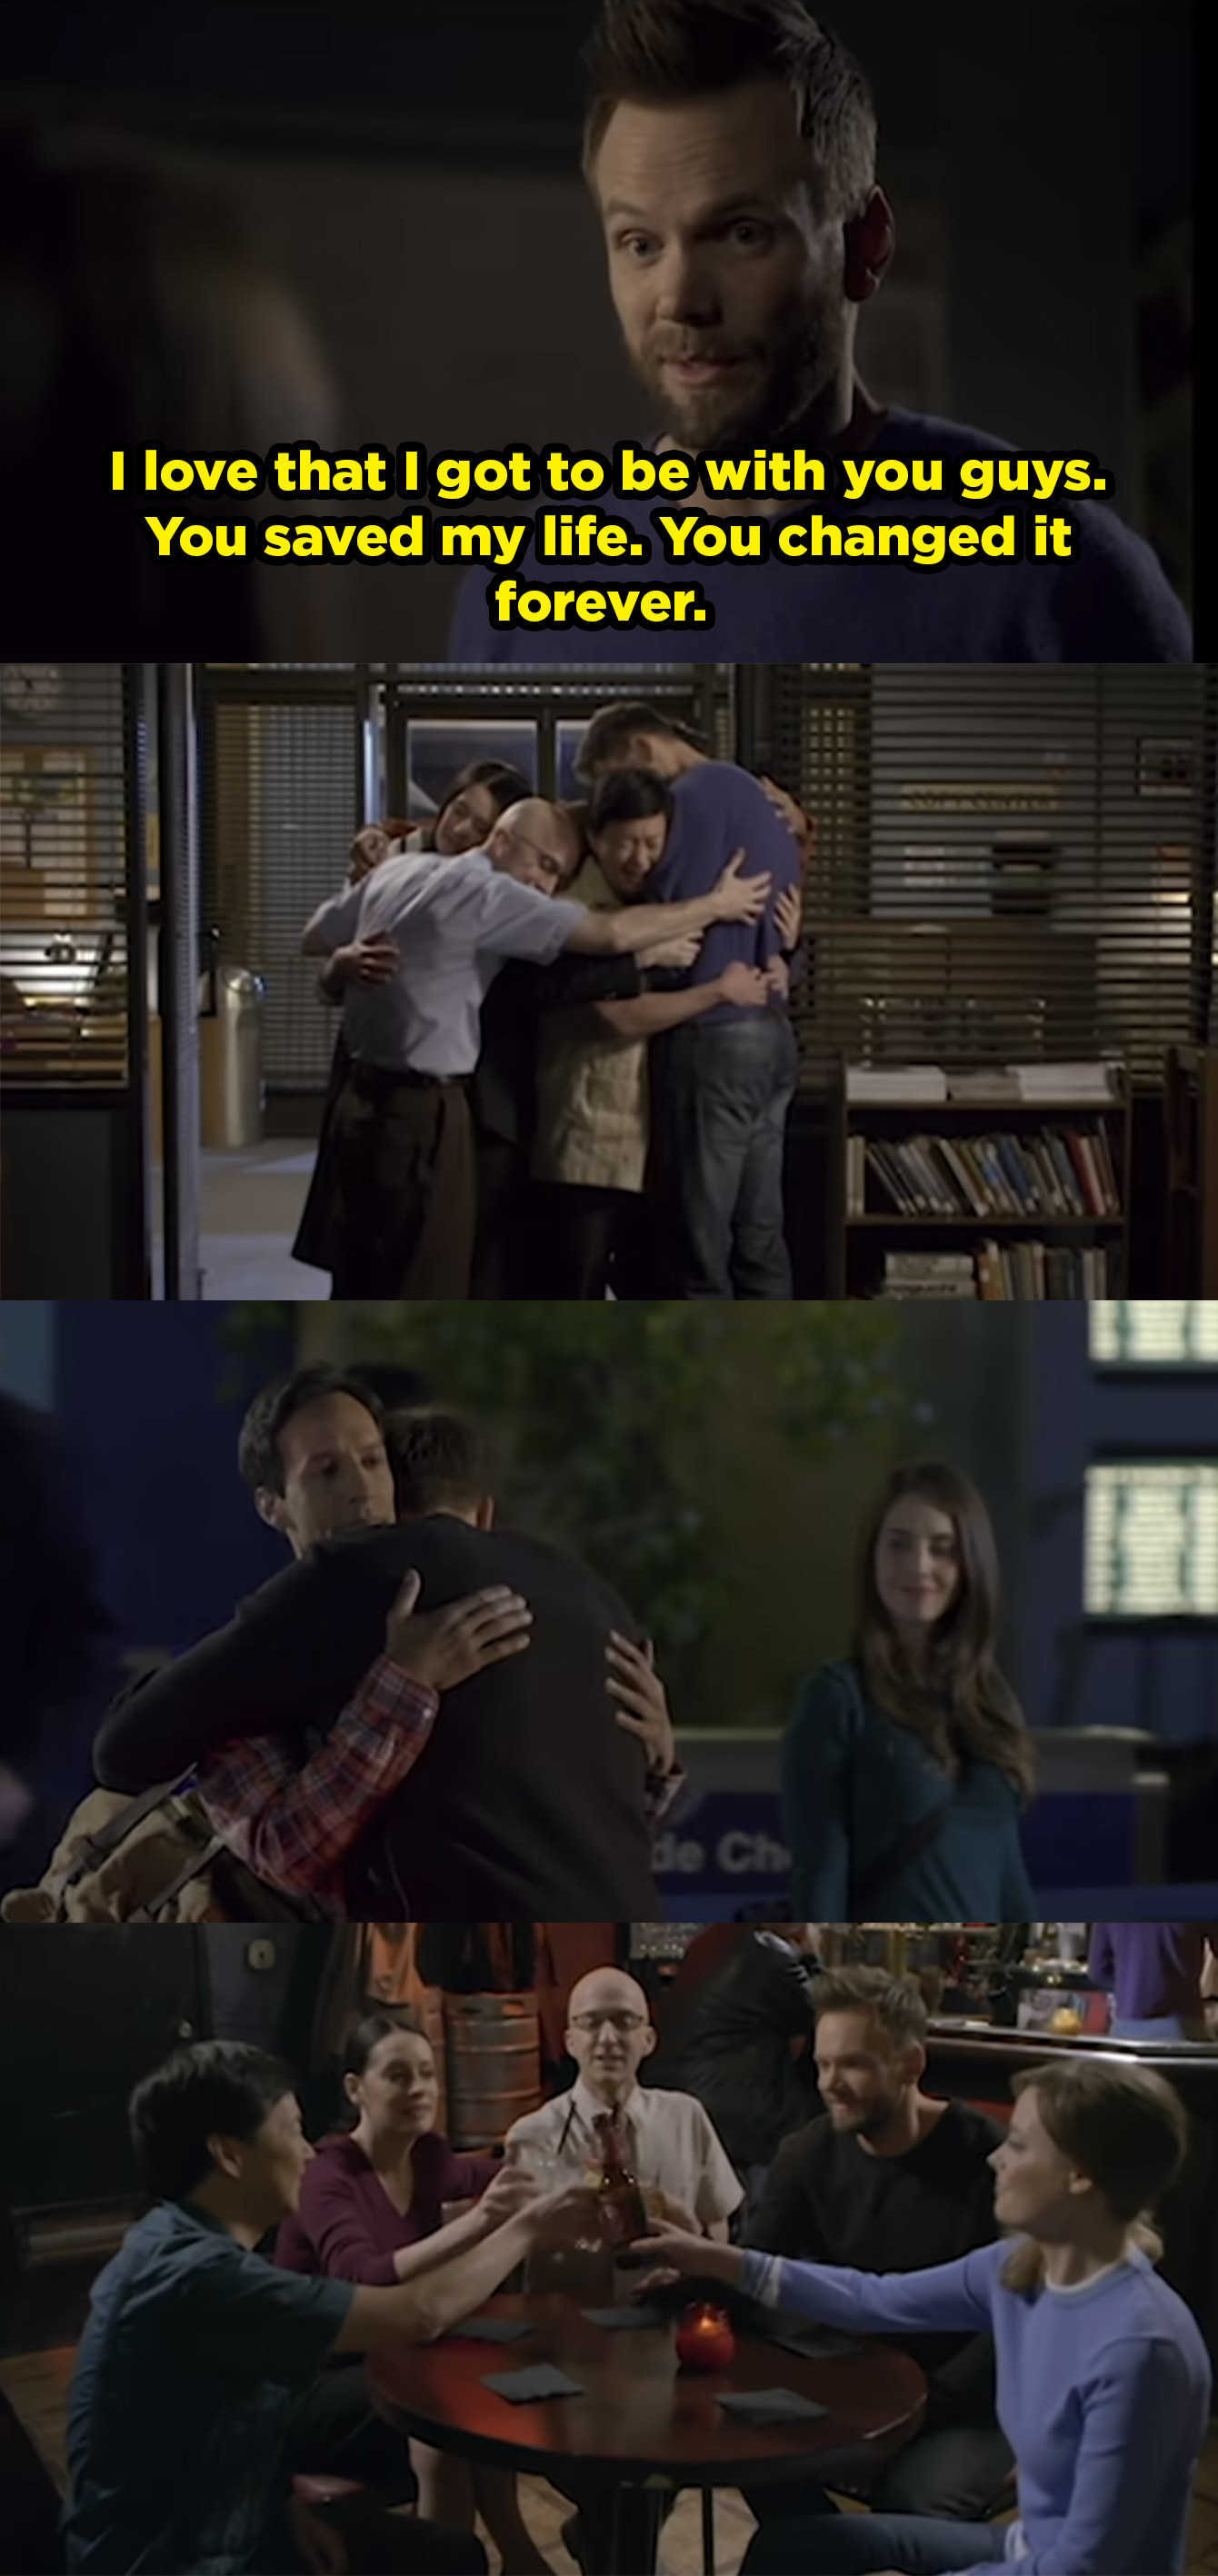 Jeff tells the study group that he&#x27;s so happy to have met them and they saved his life and changed him. Then he sends off Abed and Annie at the airport and sits down for drinks with Brita, Chang, Frankie, and Dean